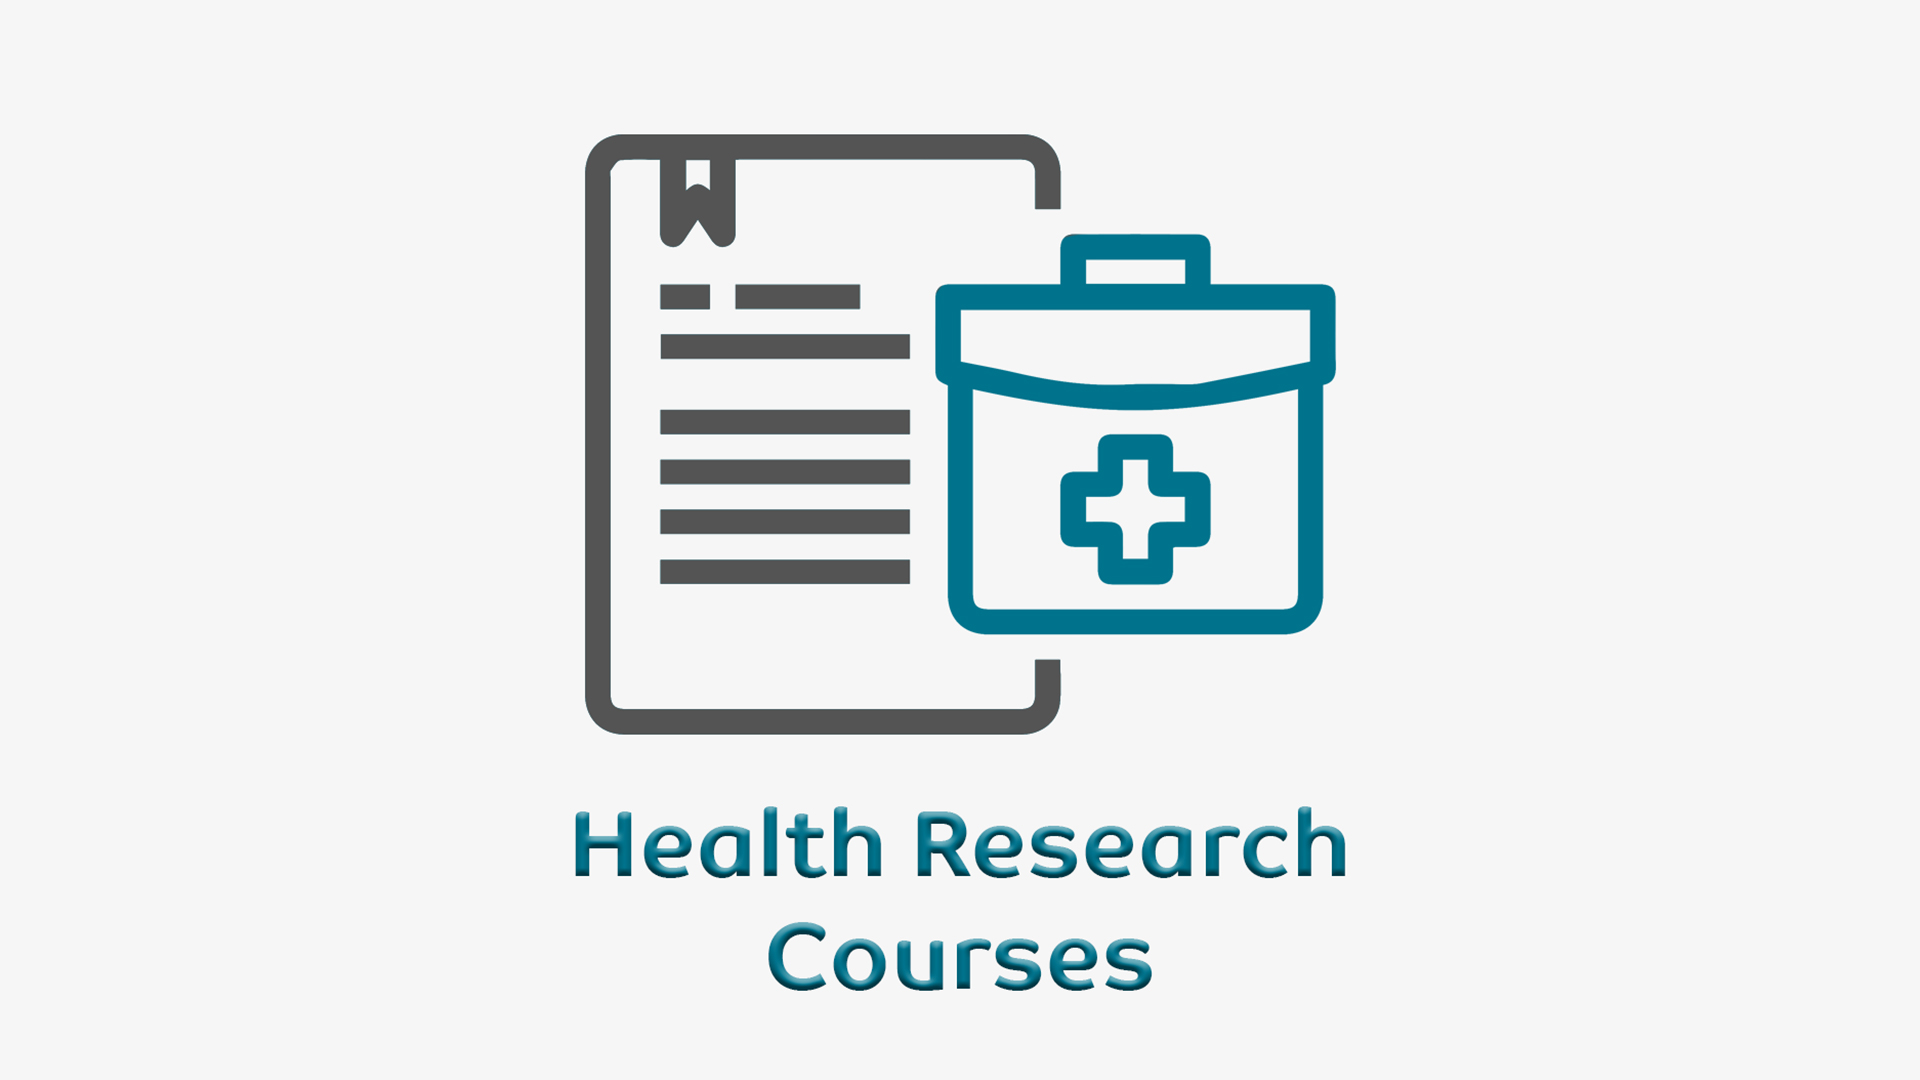 Health Research Courses